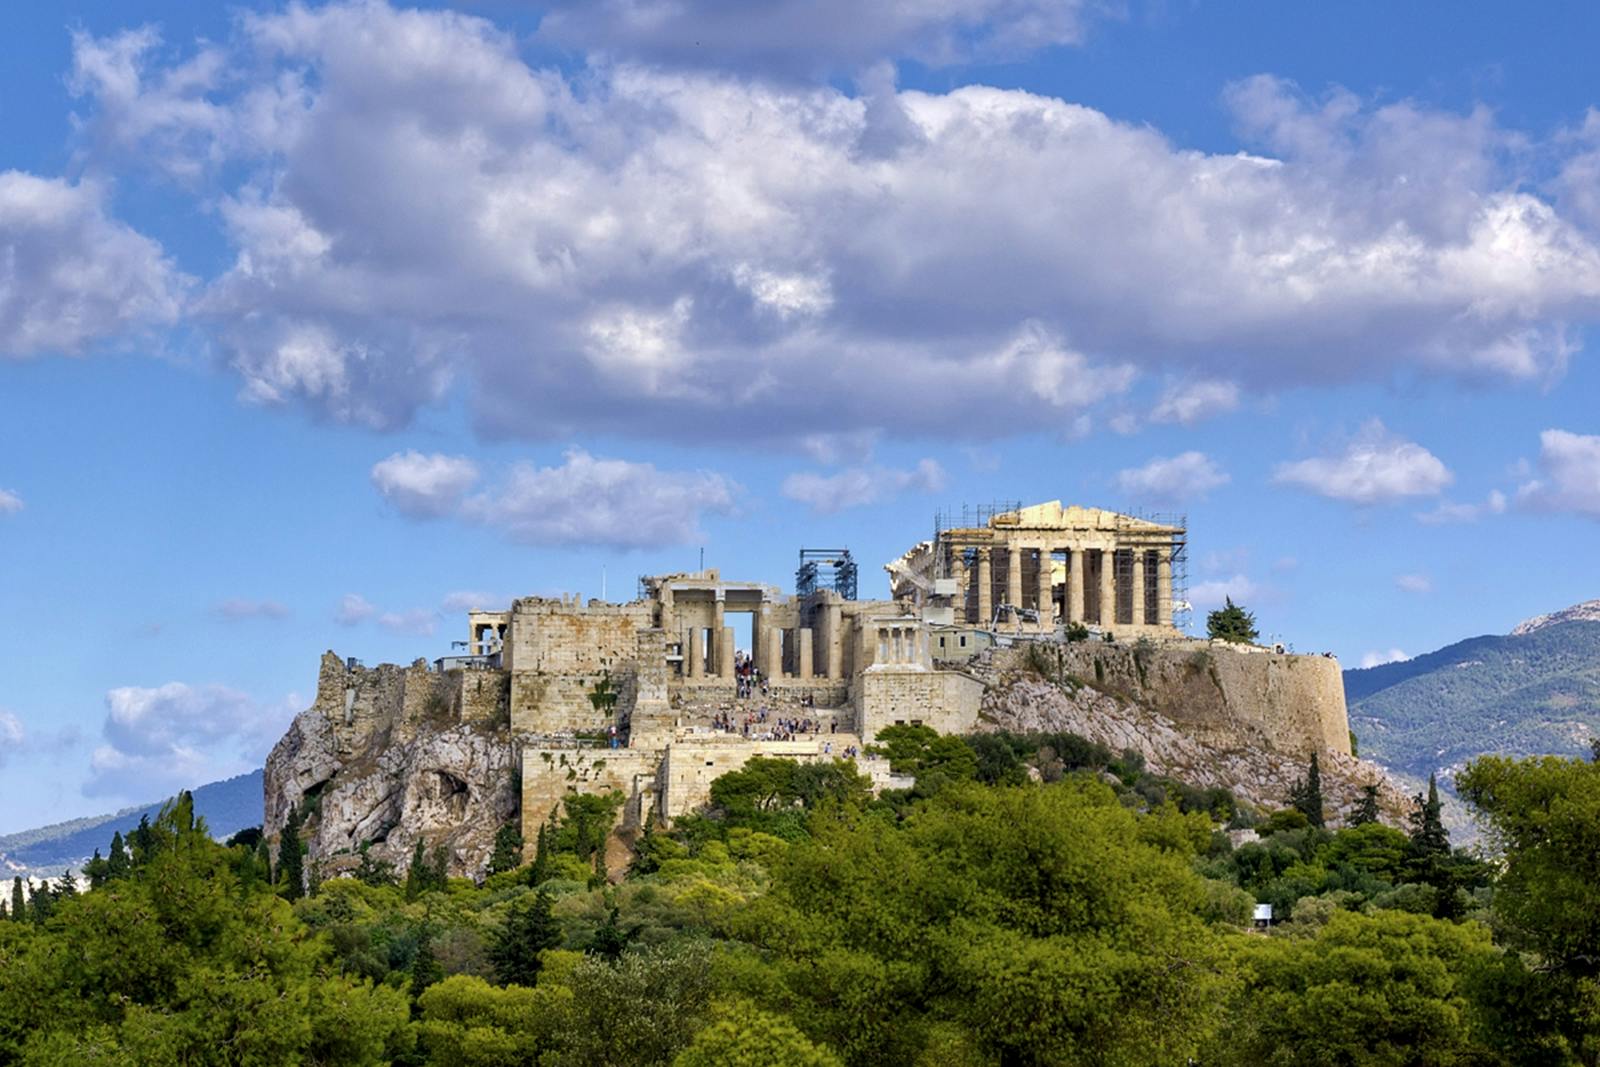 Virtual tour of the Acropolis Hill from home